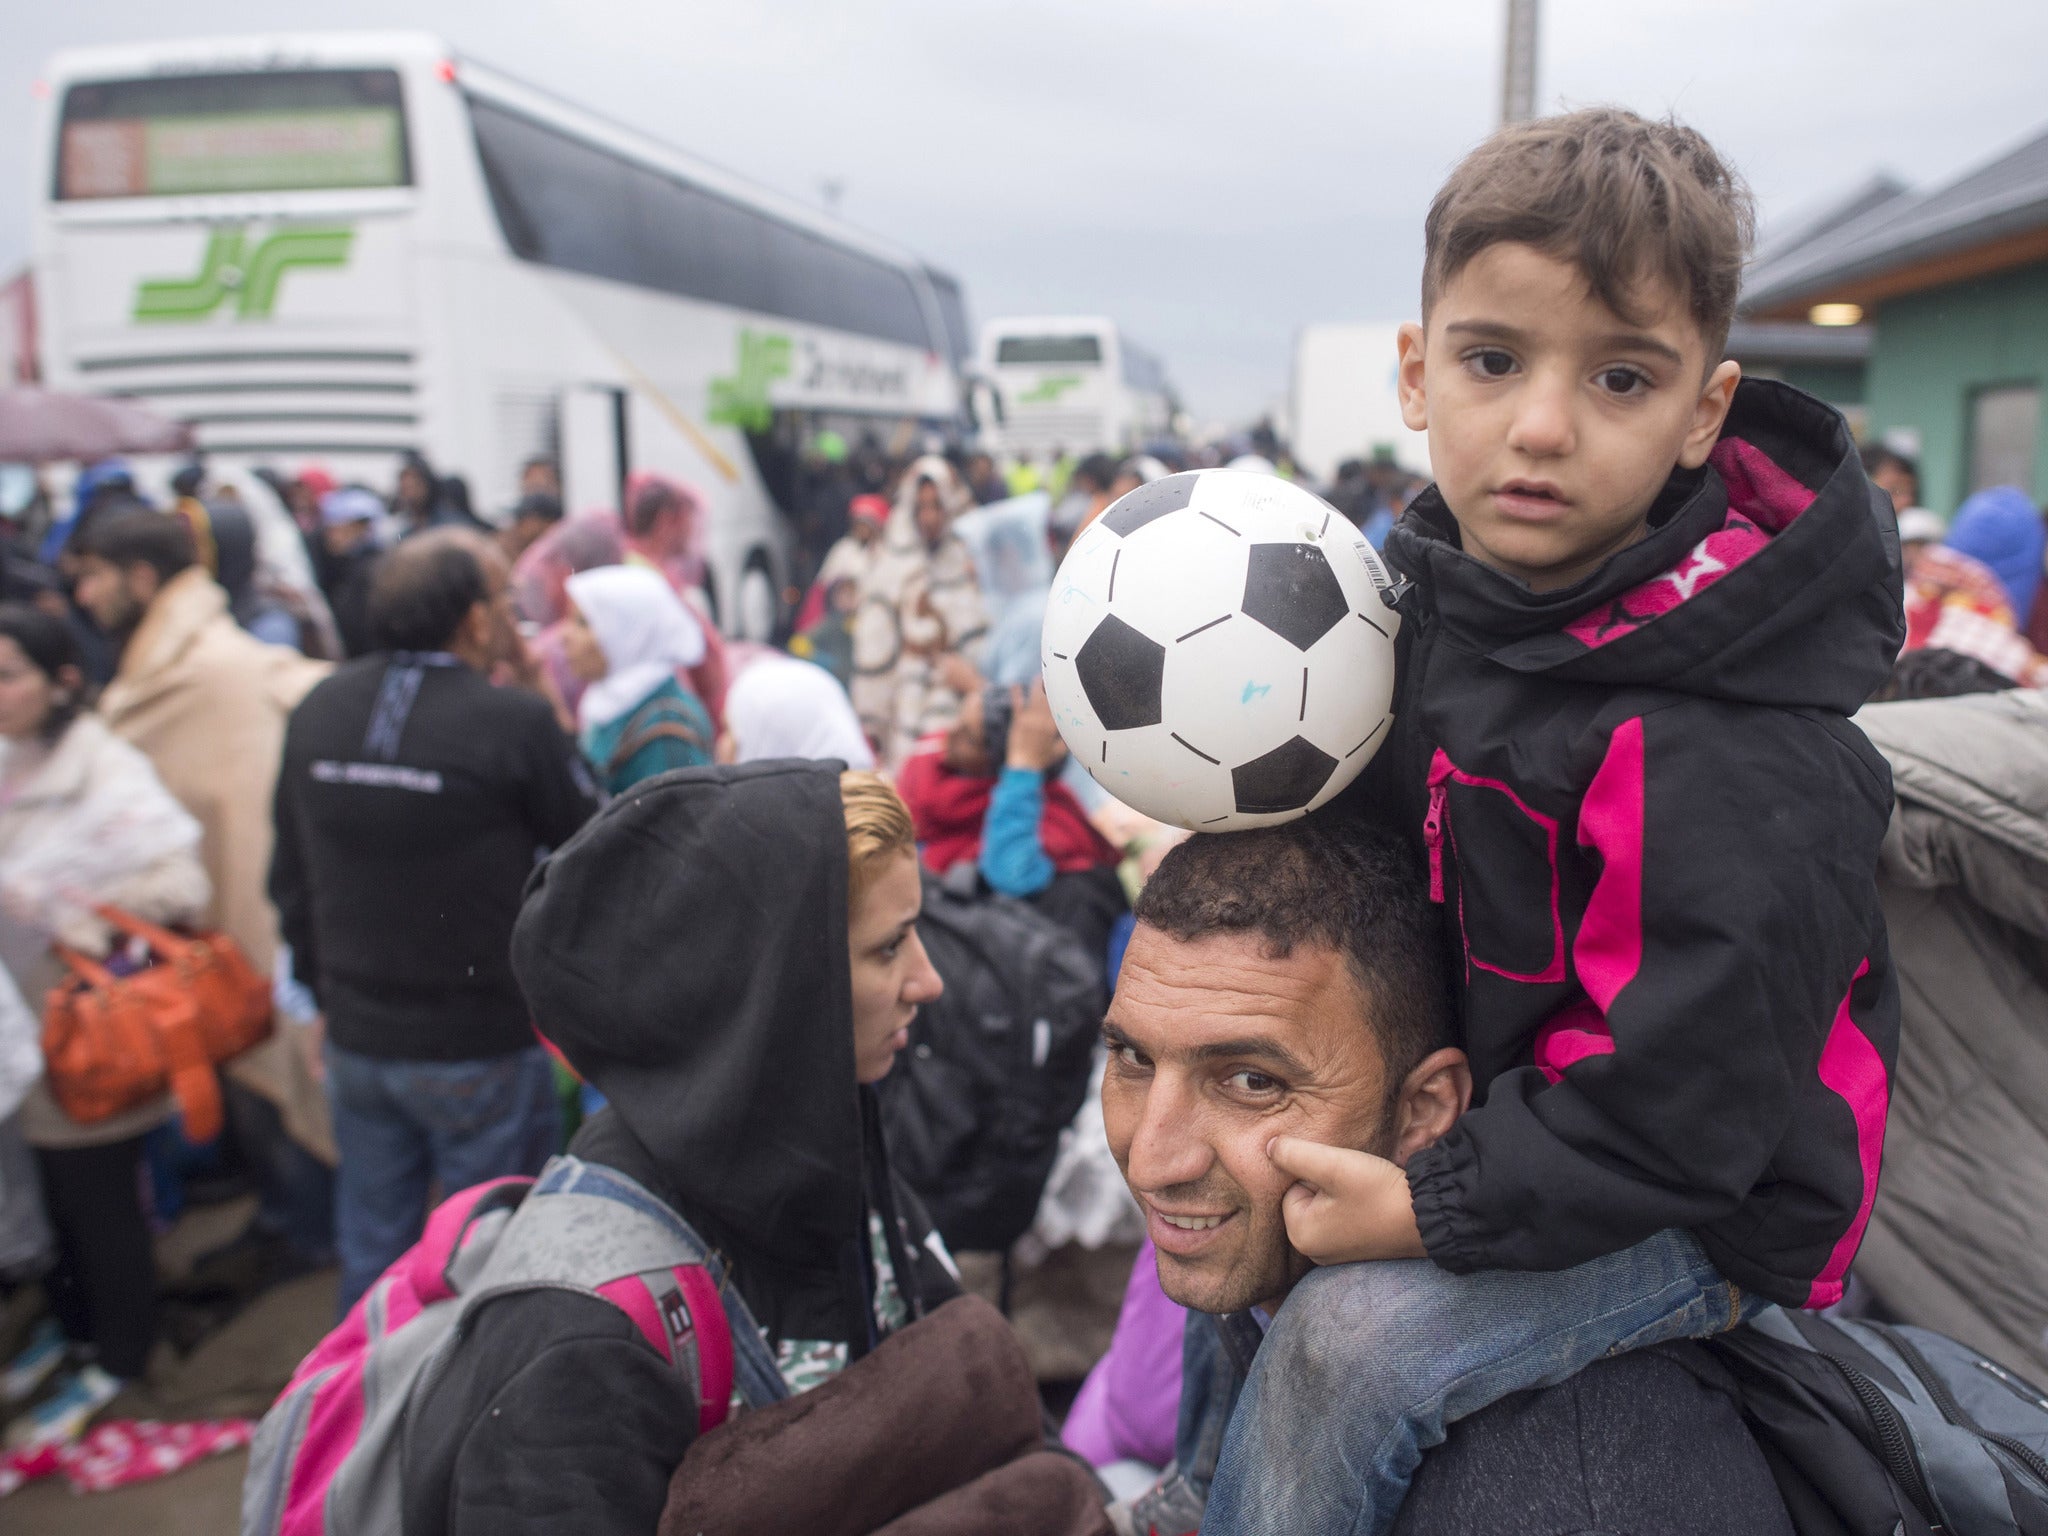 There were jubilant scenes as the migrants arrived on the Hungarian-Austrian border